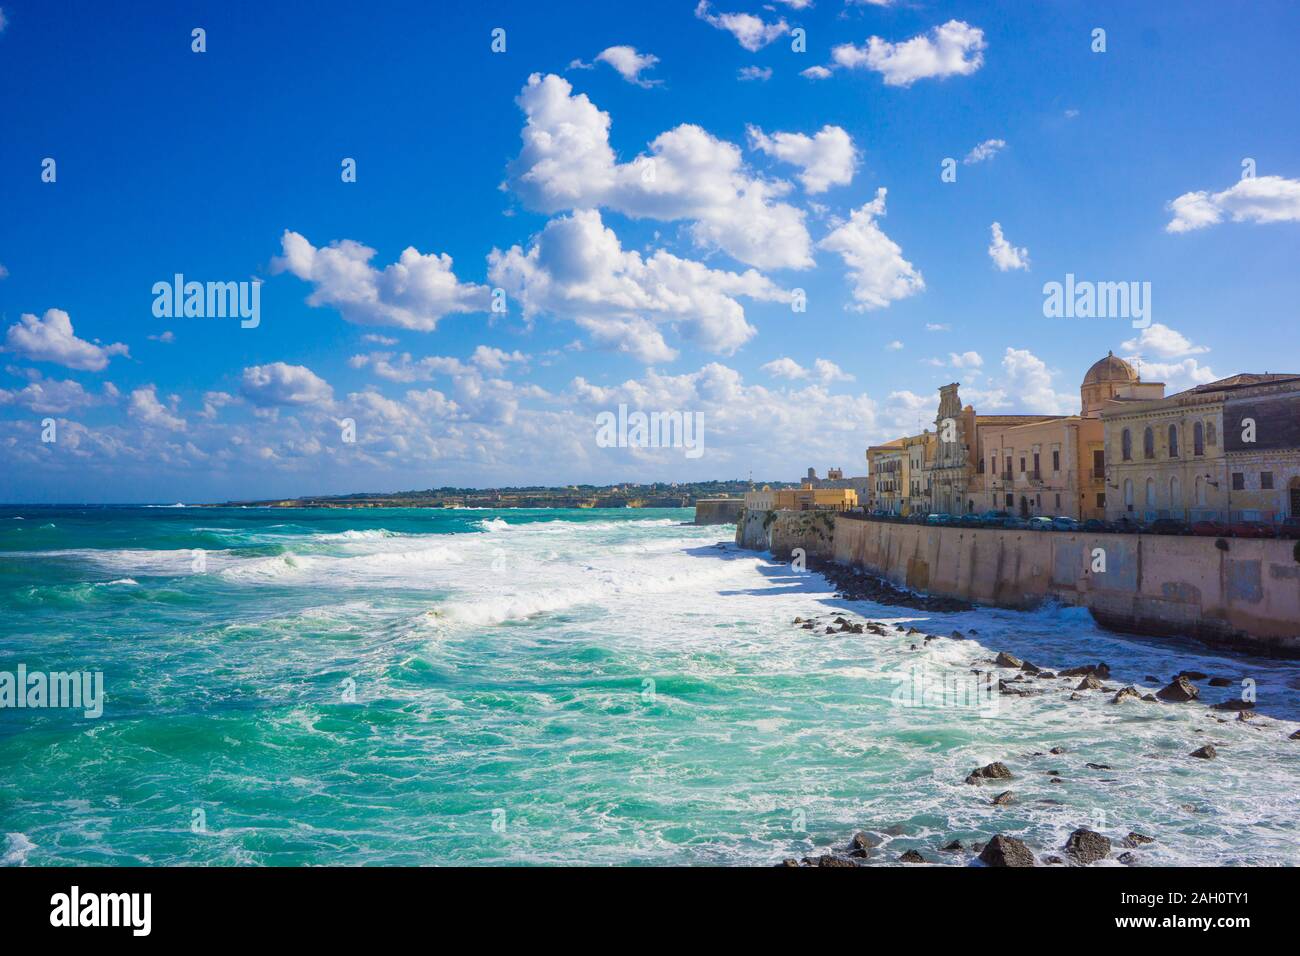 Landscape of Siracusa (Sicily, Italy) Stock Photo